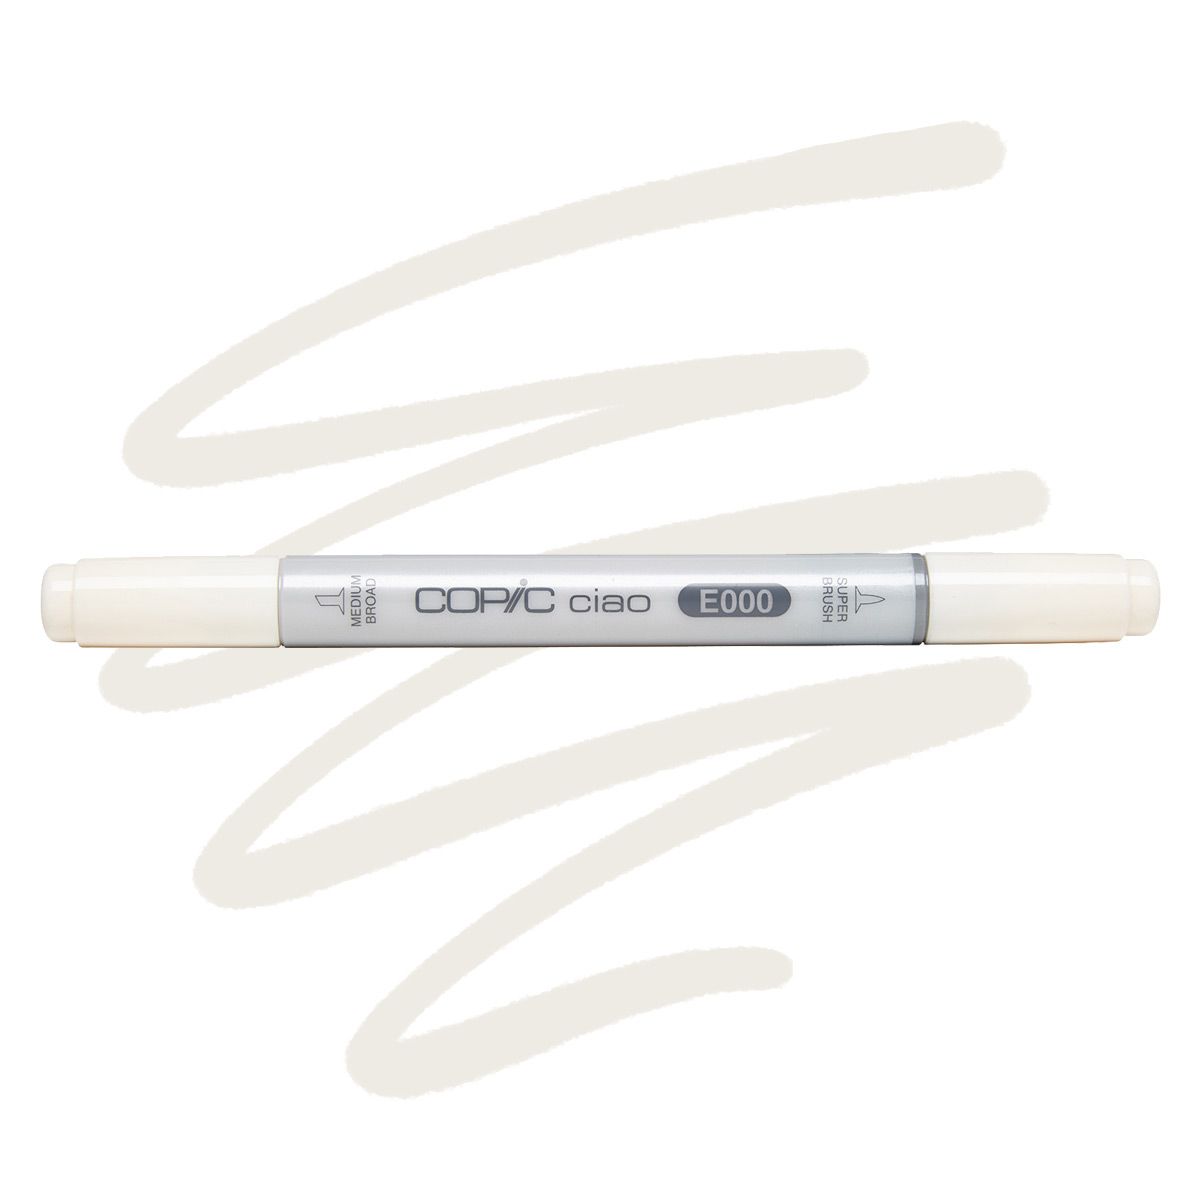 COPIC Ciao Marker E000 - Pale Fruit Pink